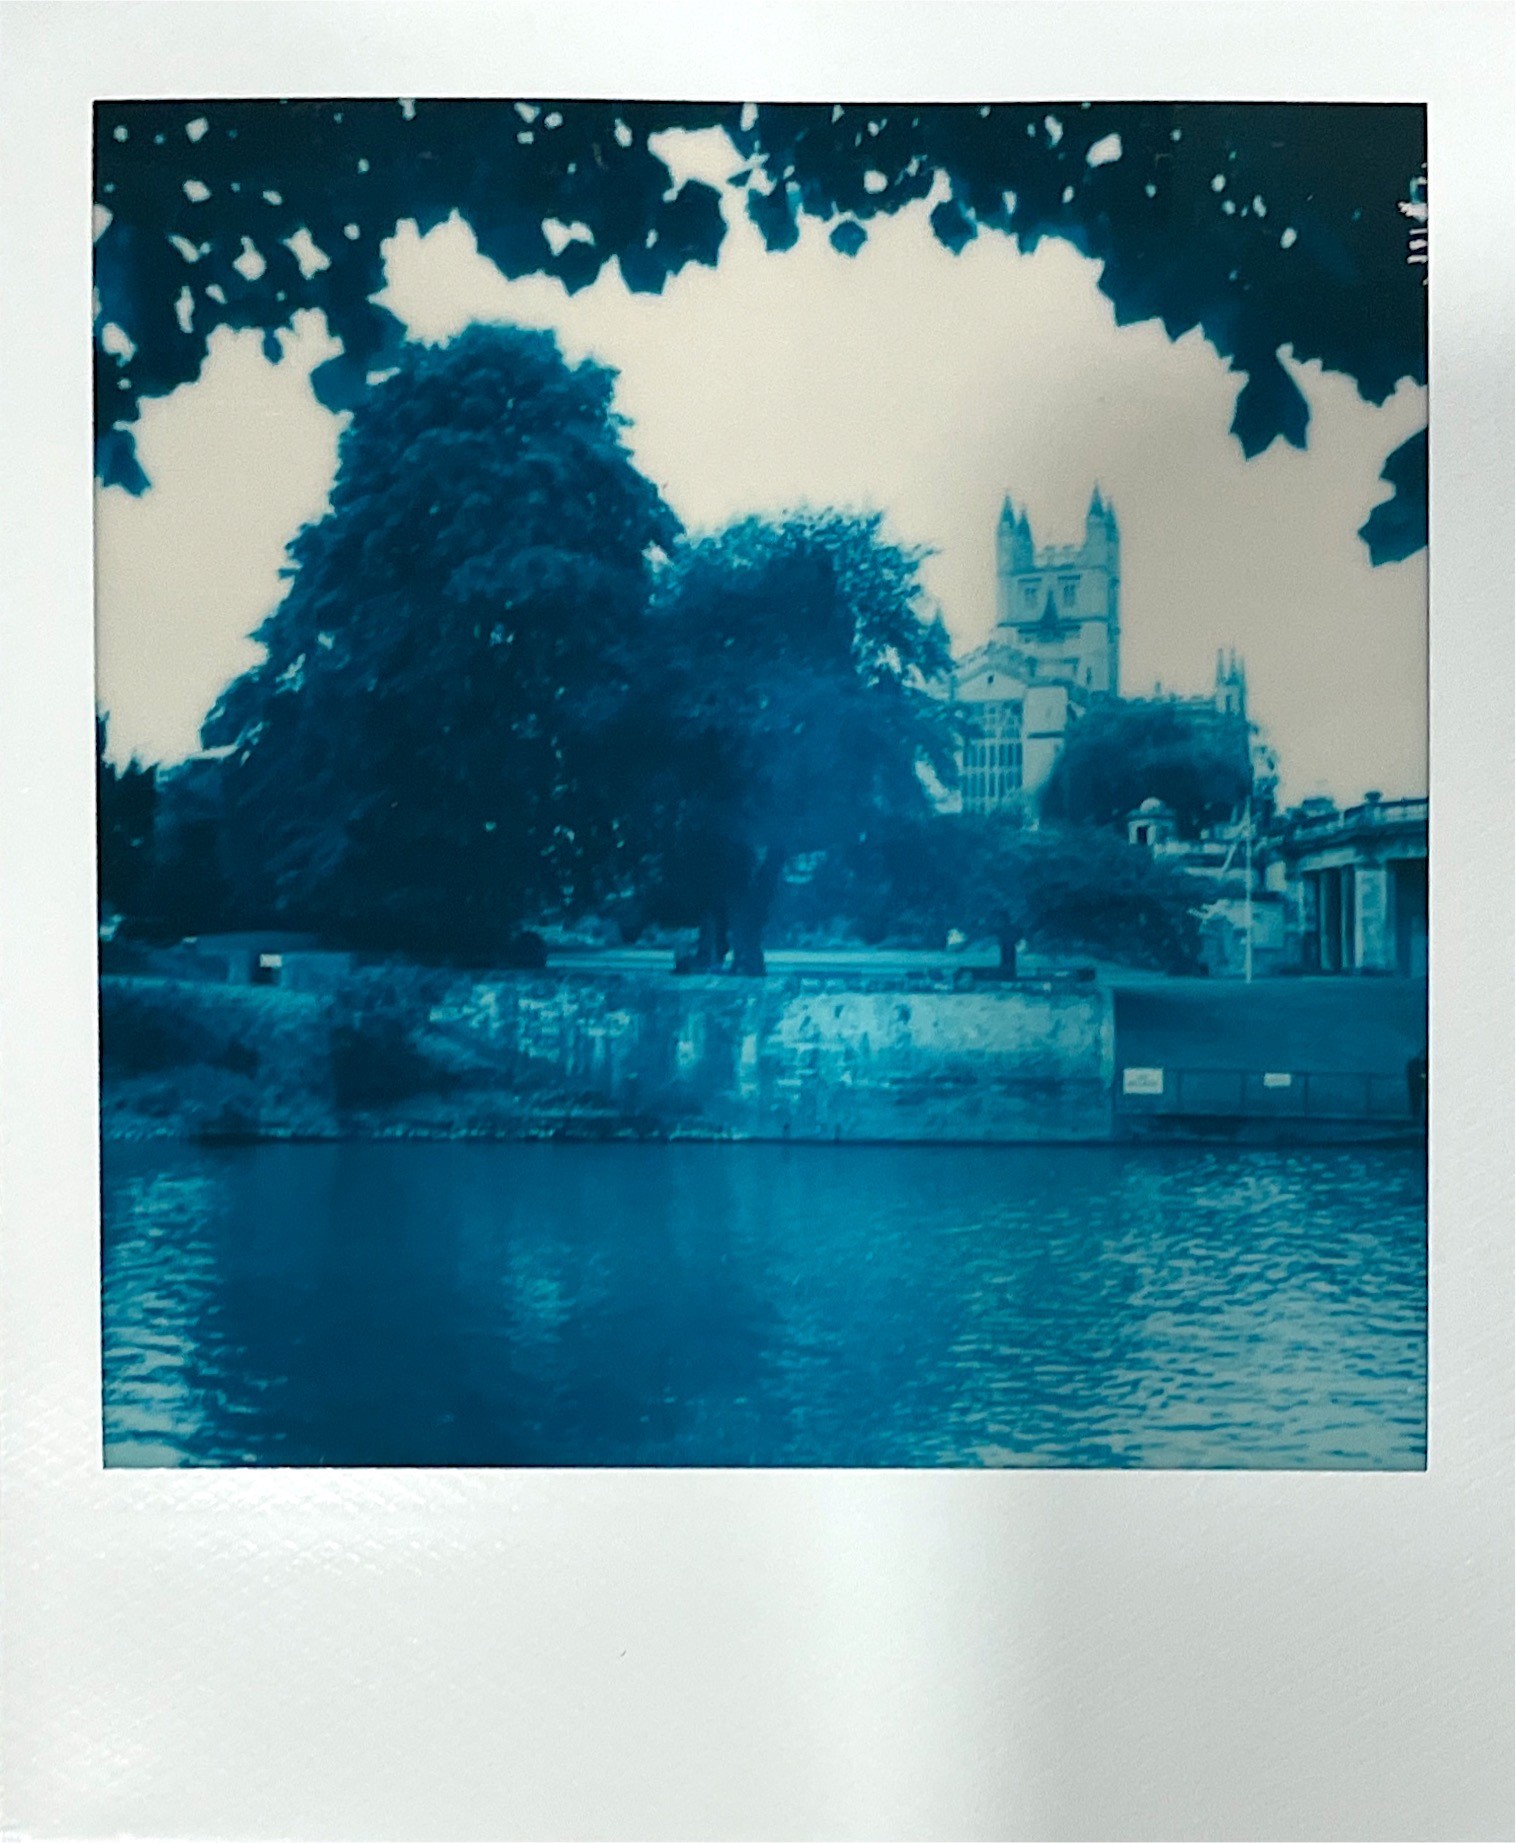 The Blue 600 film is ghostly and reminiscent of a cyanotype